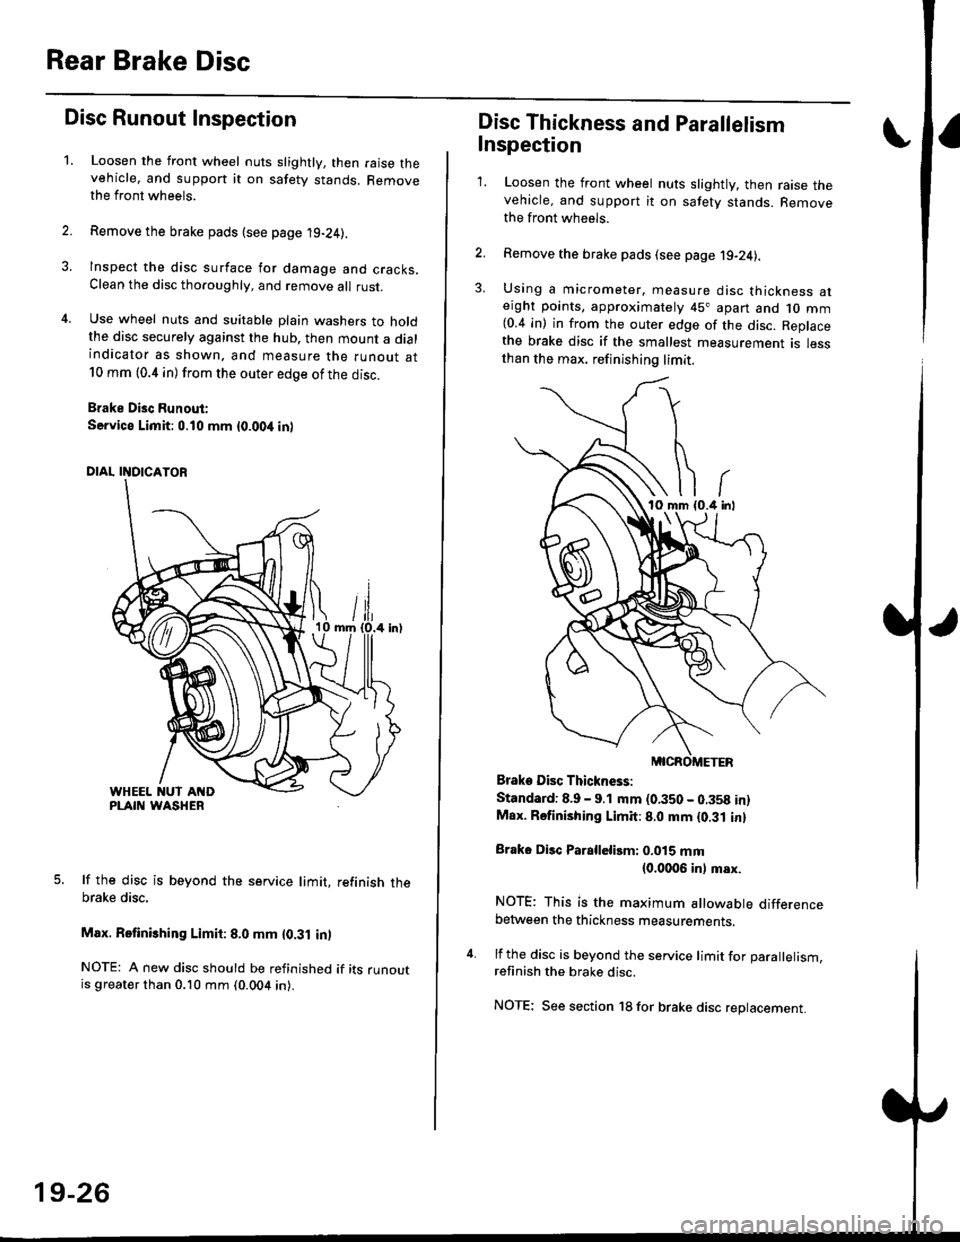 HONDA CIVIC 1996 6.G Workshop Manual Rear Brake Disc
Disc Runout Inspection
1.Loosen the front wheel nuts slightly, then raise thevehicle, and suppon it on safety stands. Removethe front wheels.
Remove the brake pads (see page 19-24).
In